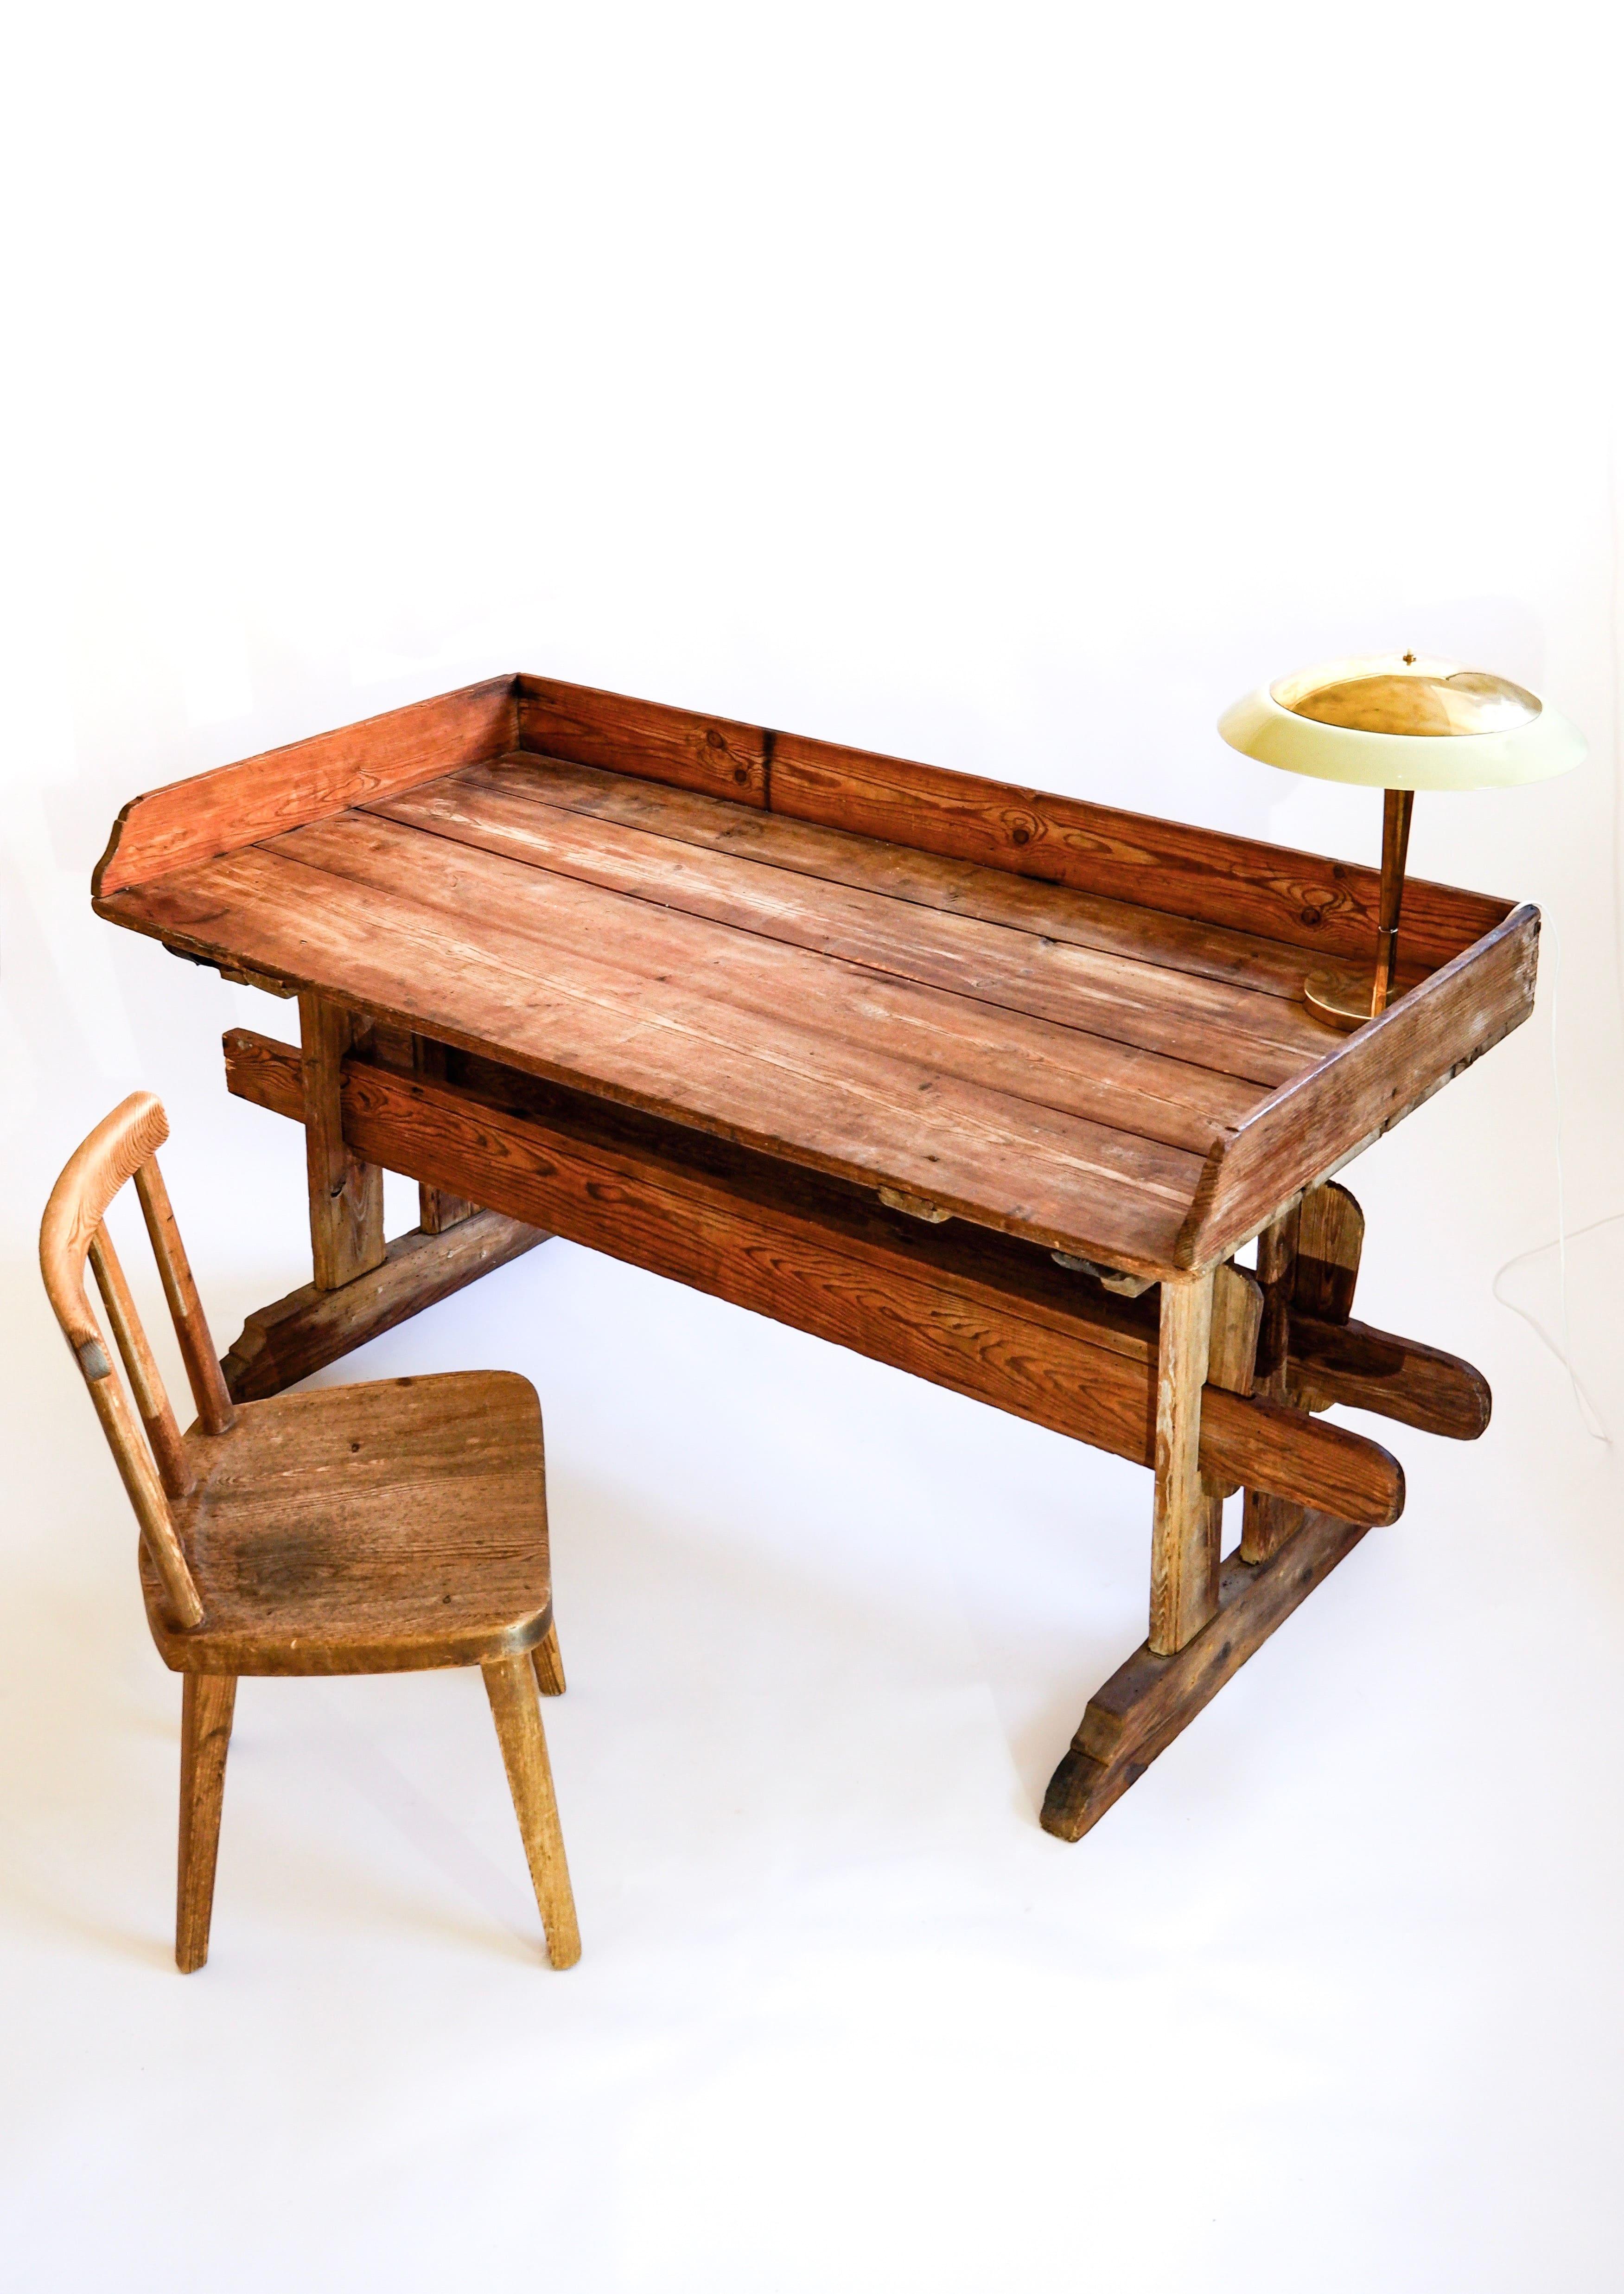 Impressive Folkart swedish table/desk made in solid pine in the late XIX century. The table is composed by two wood crosses hold by four wood keys in total. The top of the consol table has an amazing patina. Overhall the table has no structural